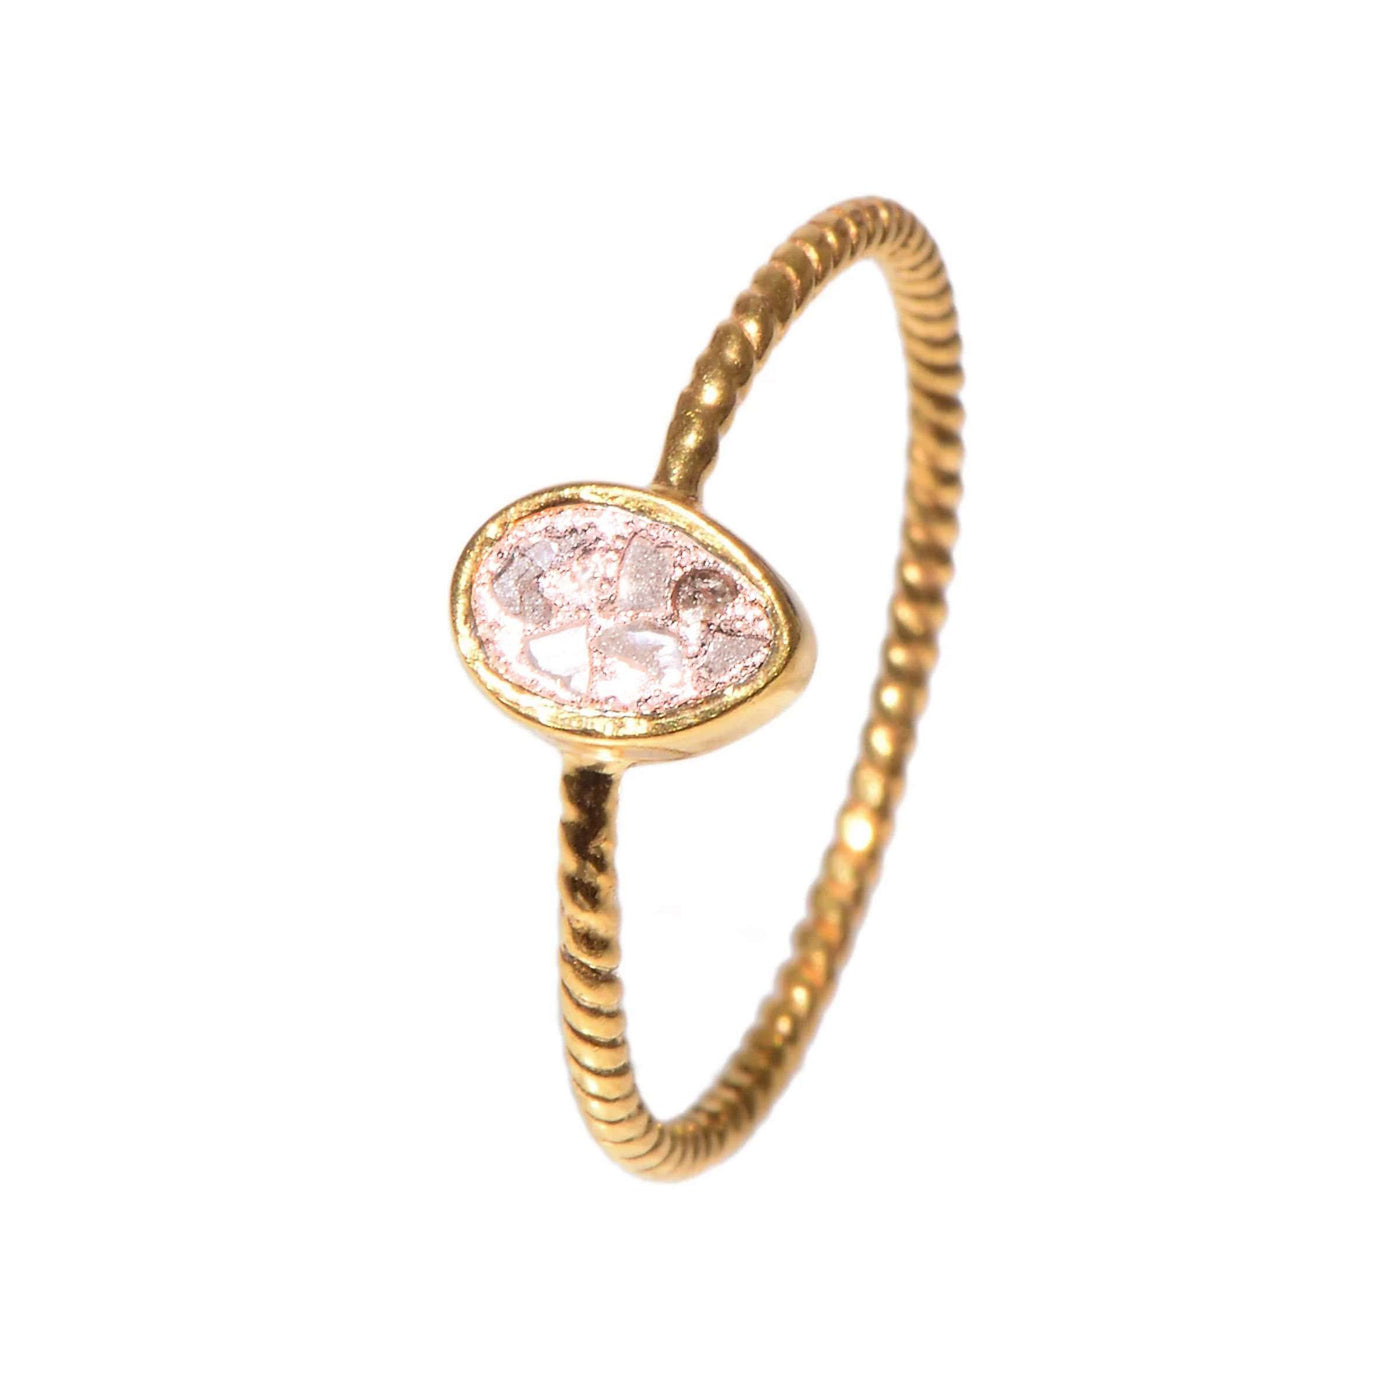 Raw Uncut Wire Ring Gold Vermeil